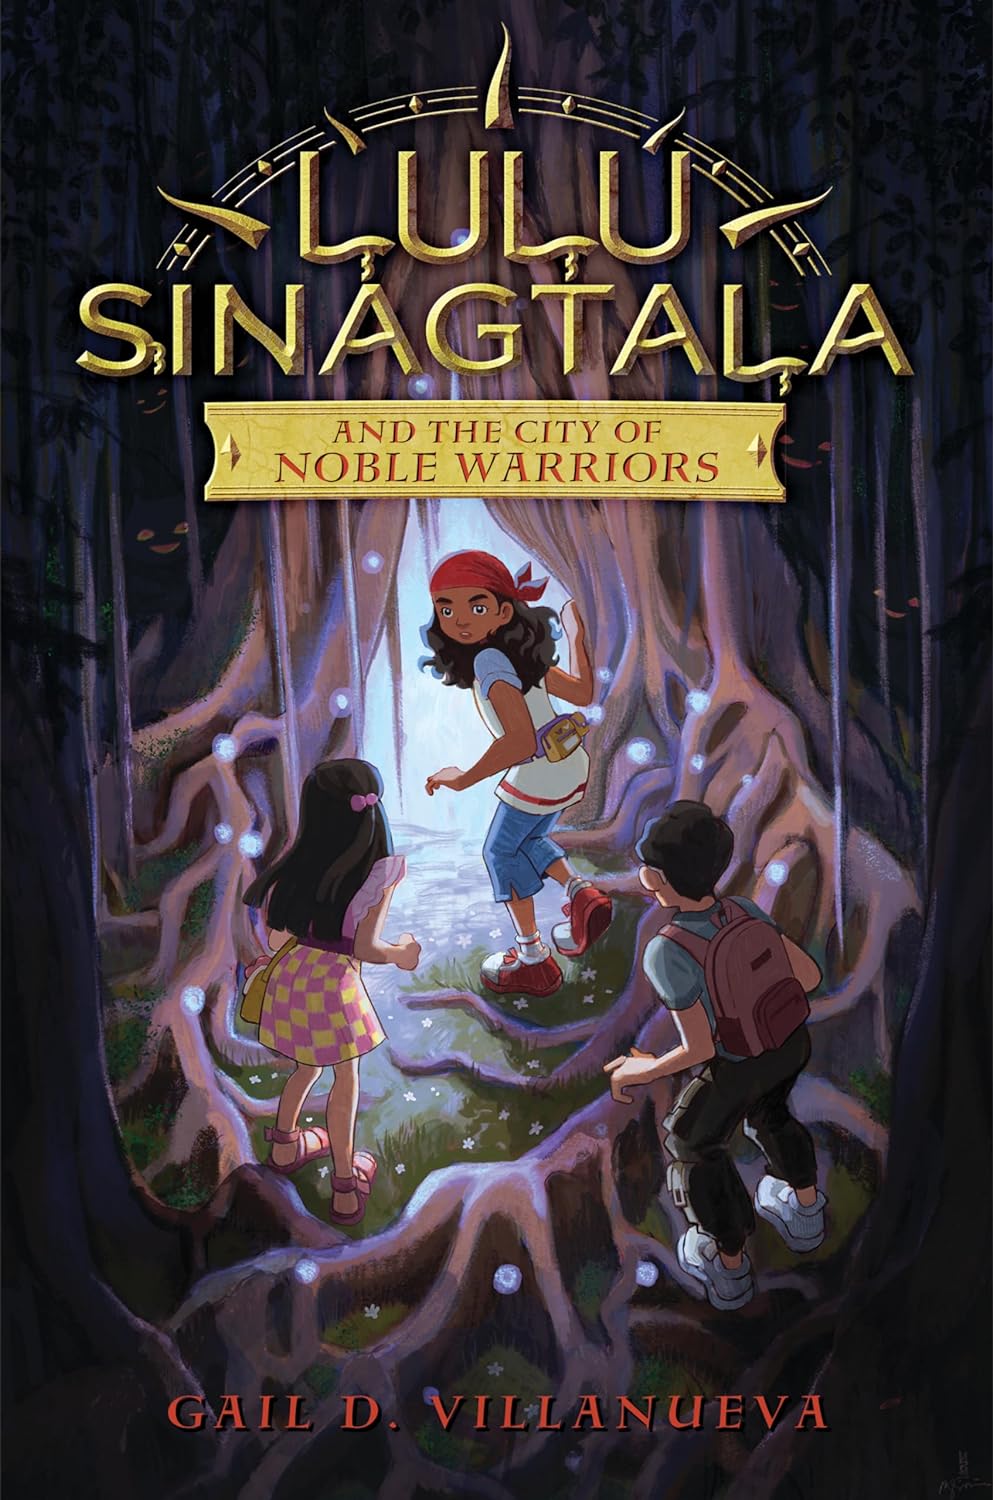 Lulu Sinagtala and the City of Noble Warriors: 1 (Lulu Sinagtala and the Tagalog Gods, 1) by Gail D. Villanueva